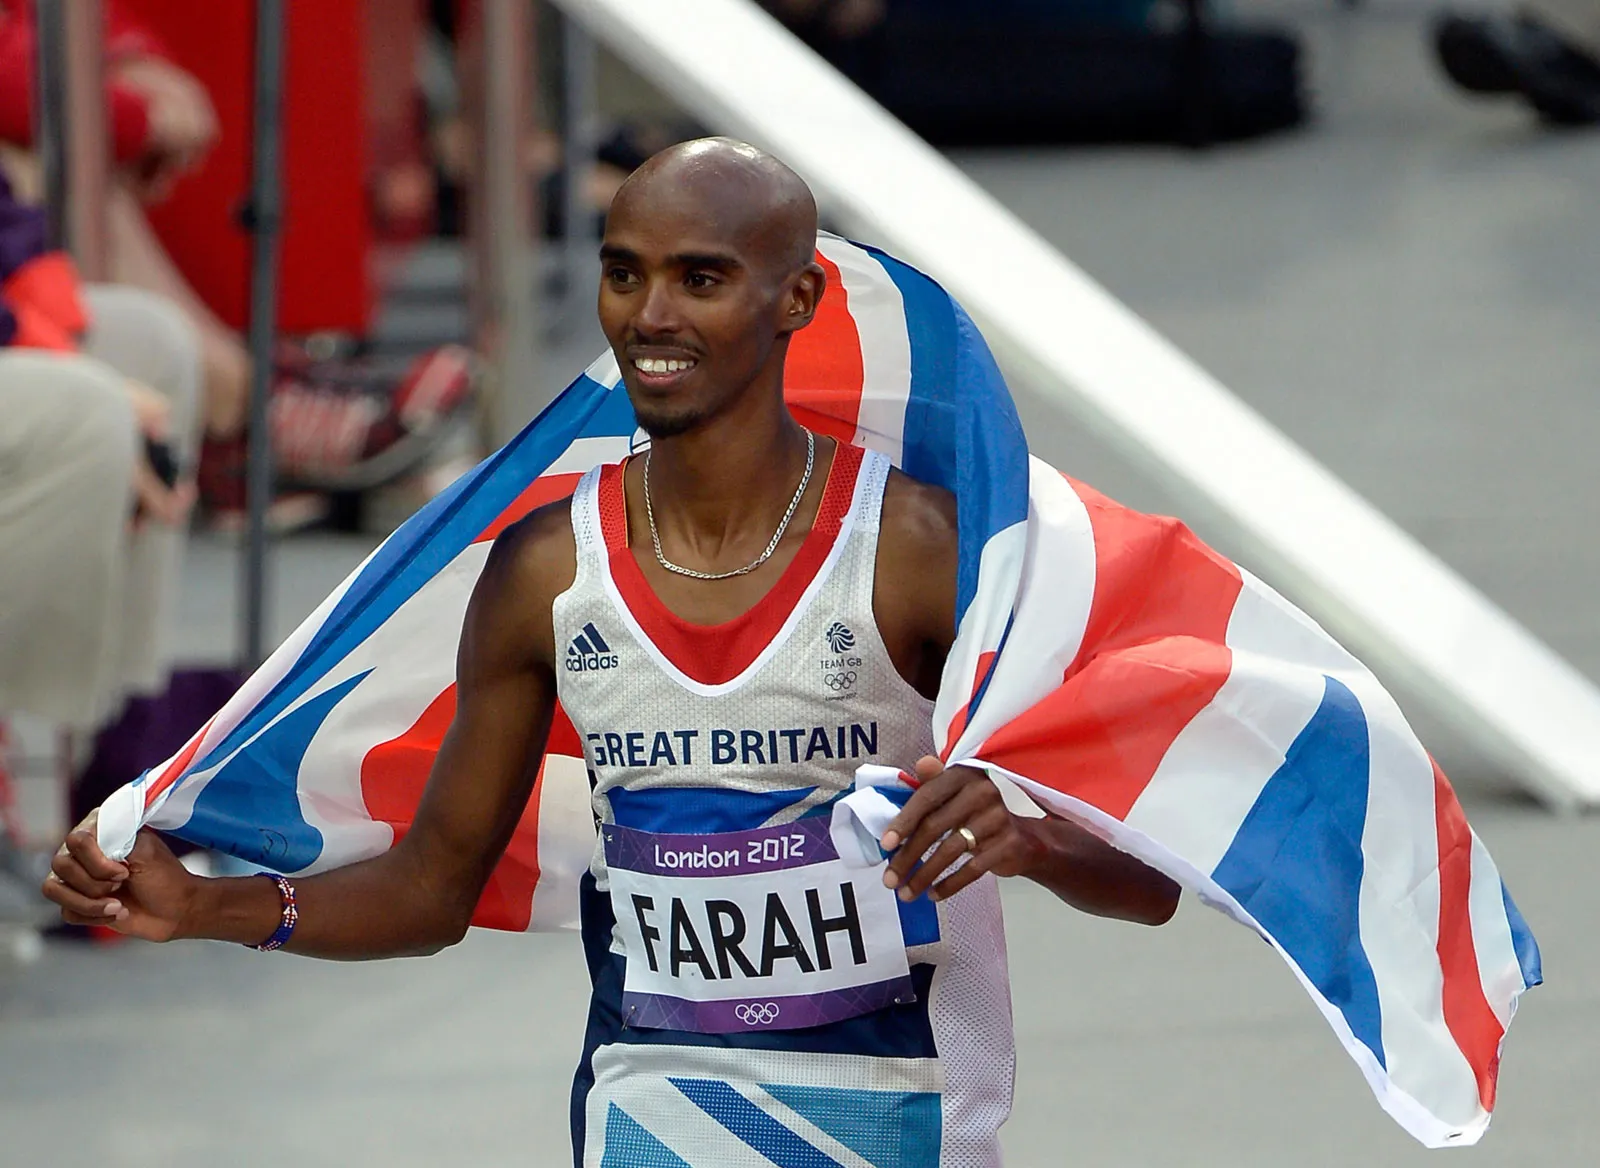 Mo Farah after his win at the London Olympics 2012 (In a file photo; Image Credits - Twitter)